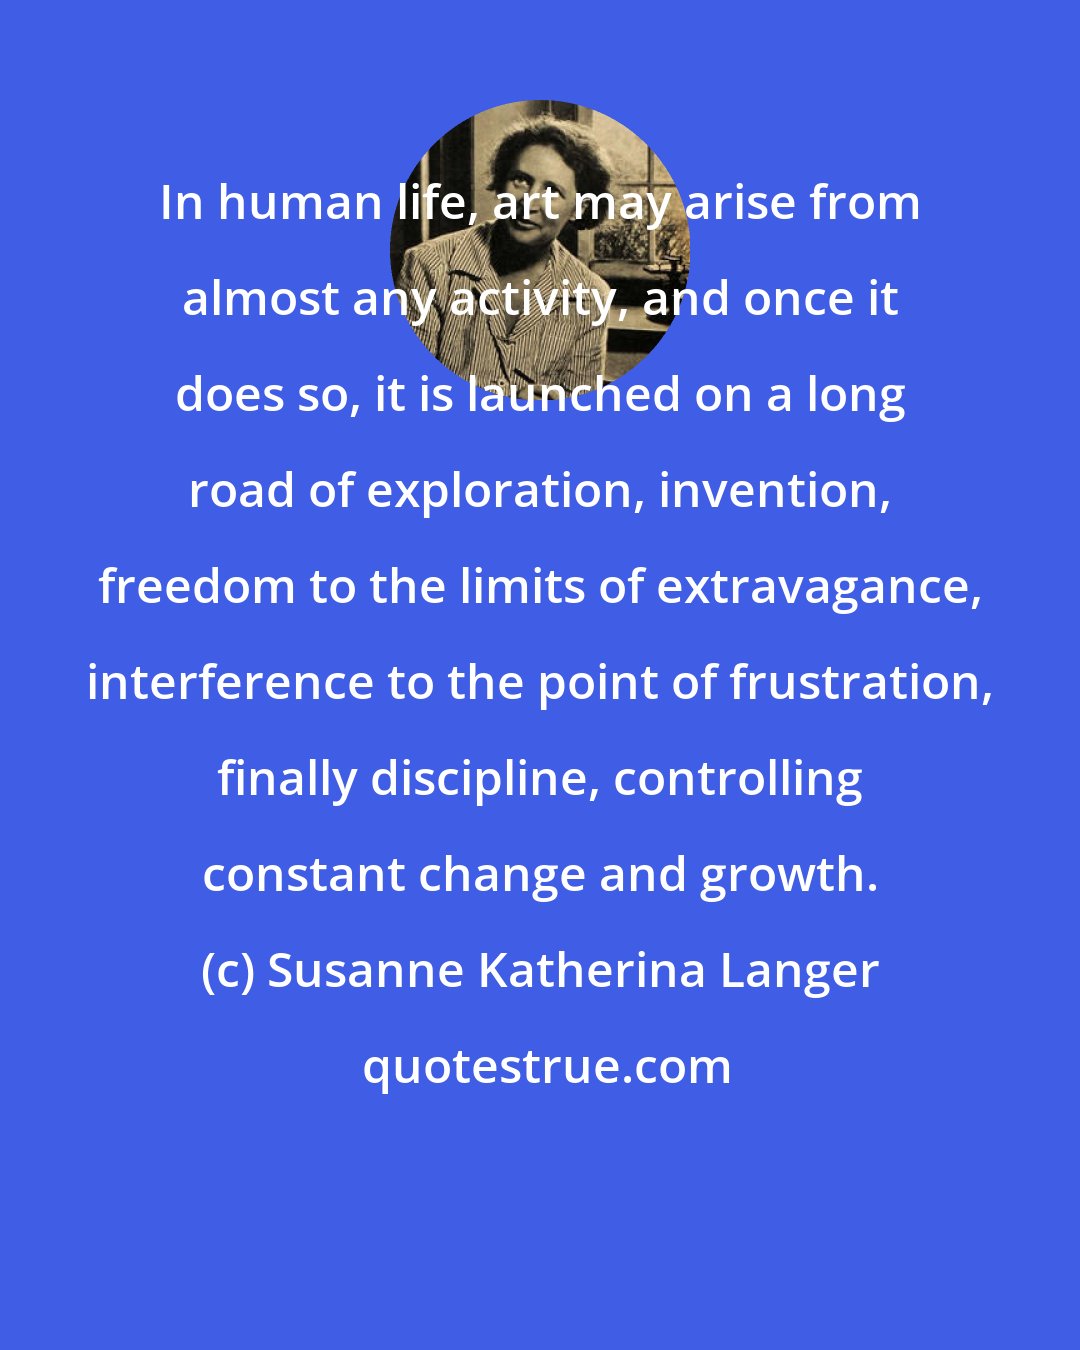 Susanne Katherina Langer: In human life, art may arise from almost any activity, and once it does so, it is launched on a long road of exploration, invention, freedom to the limits of extravagance, interference to the point of frustration, finally discipline, controlling constant change and growth.